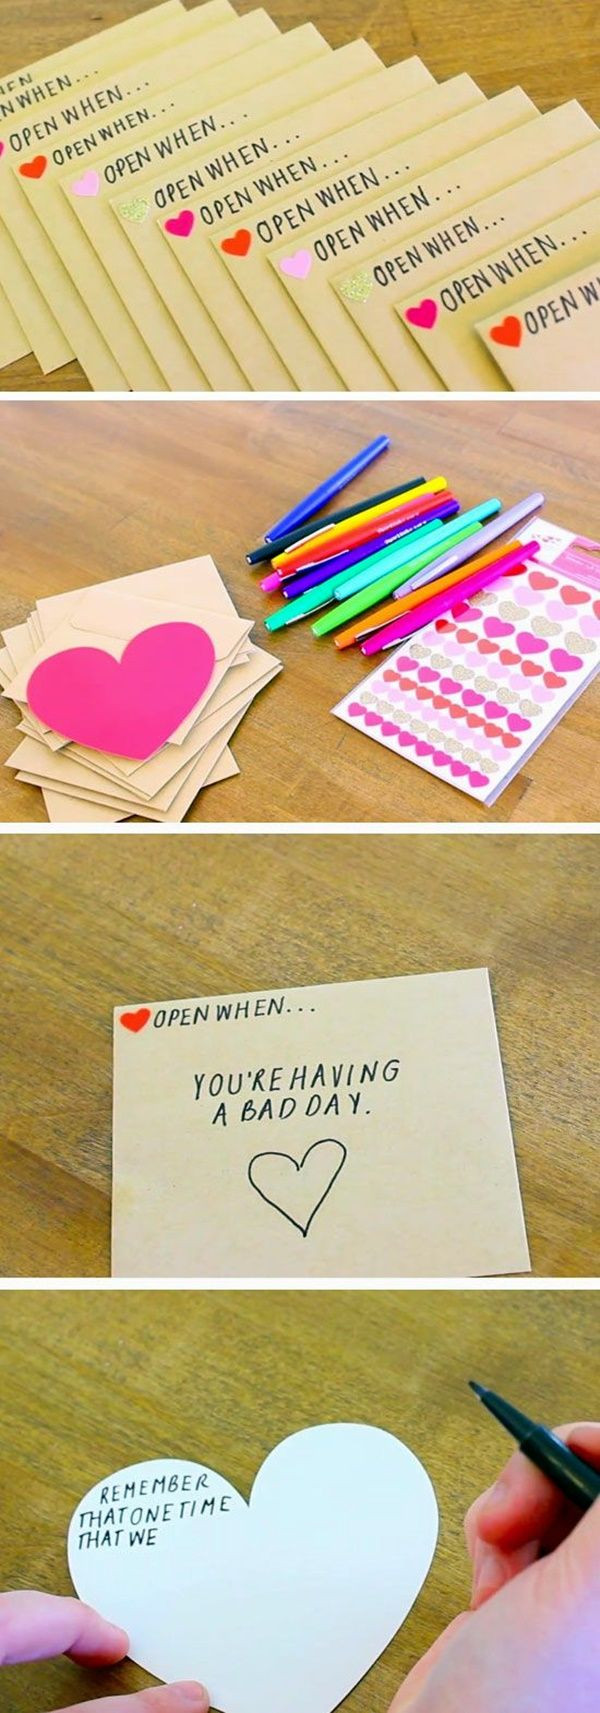 Craft Gift Ideas For Boyfriend
 101 Homemade Valentines Day Ideas for Him that re really